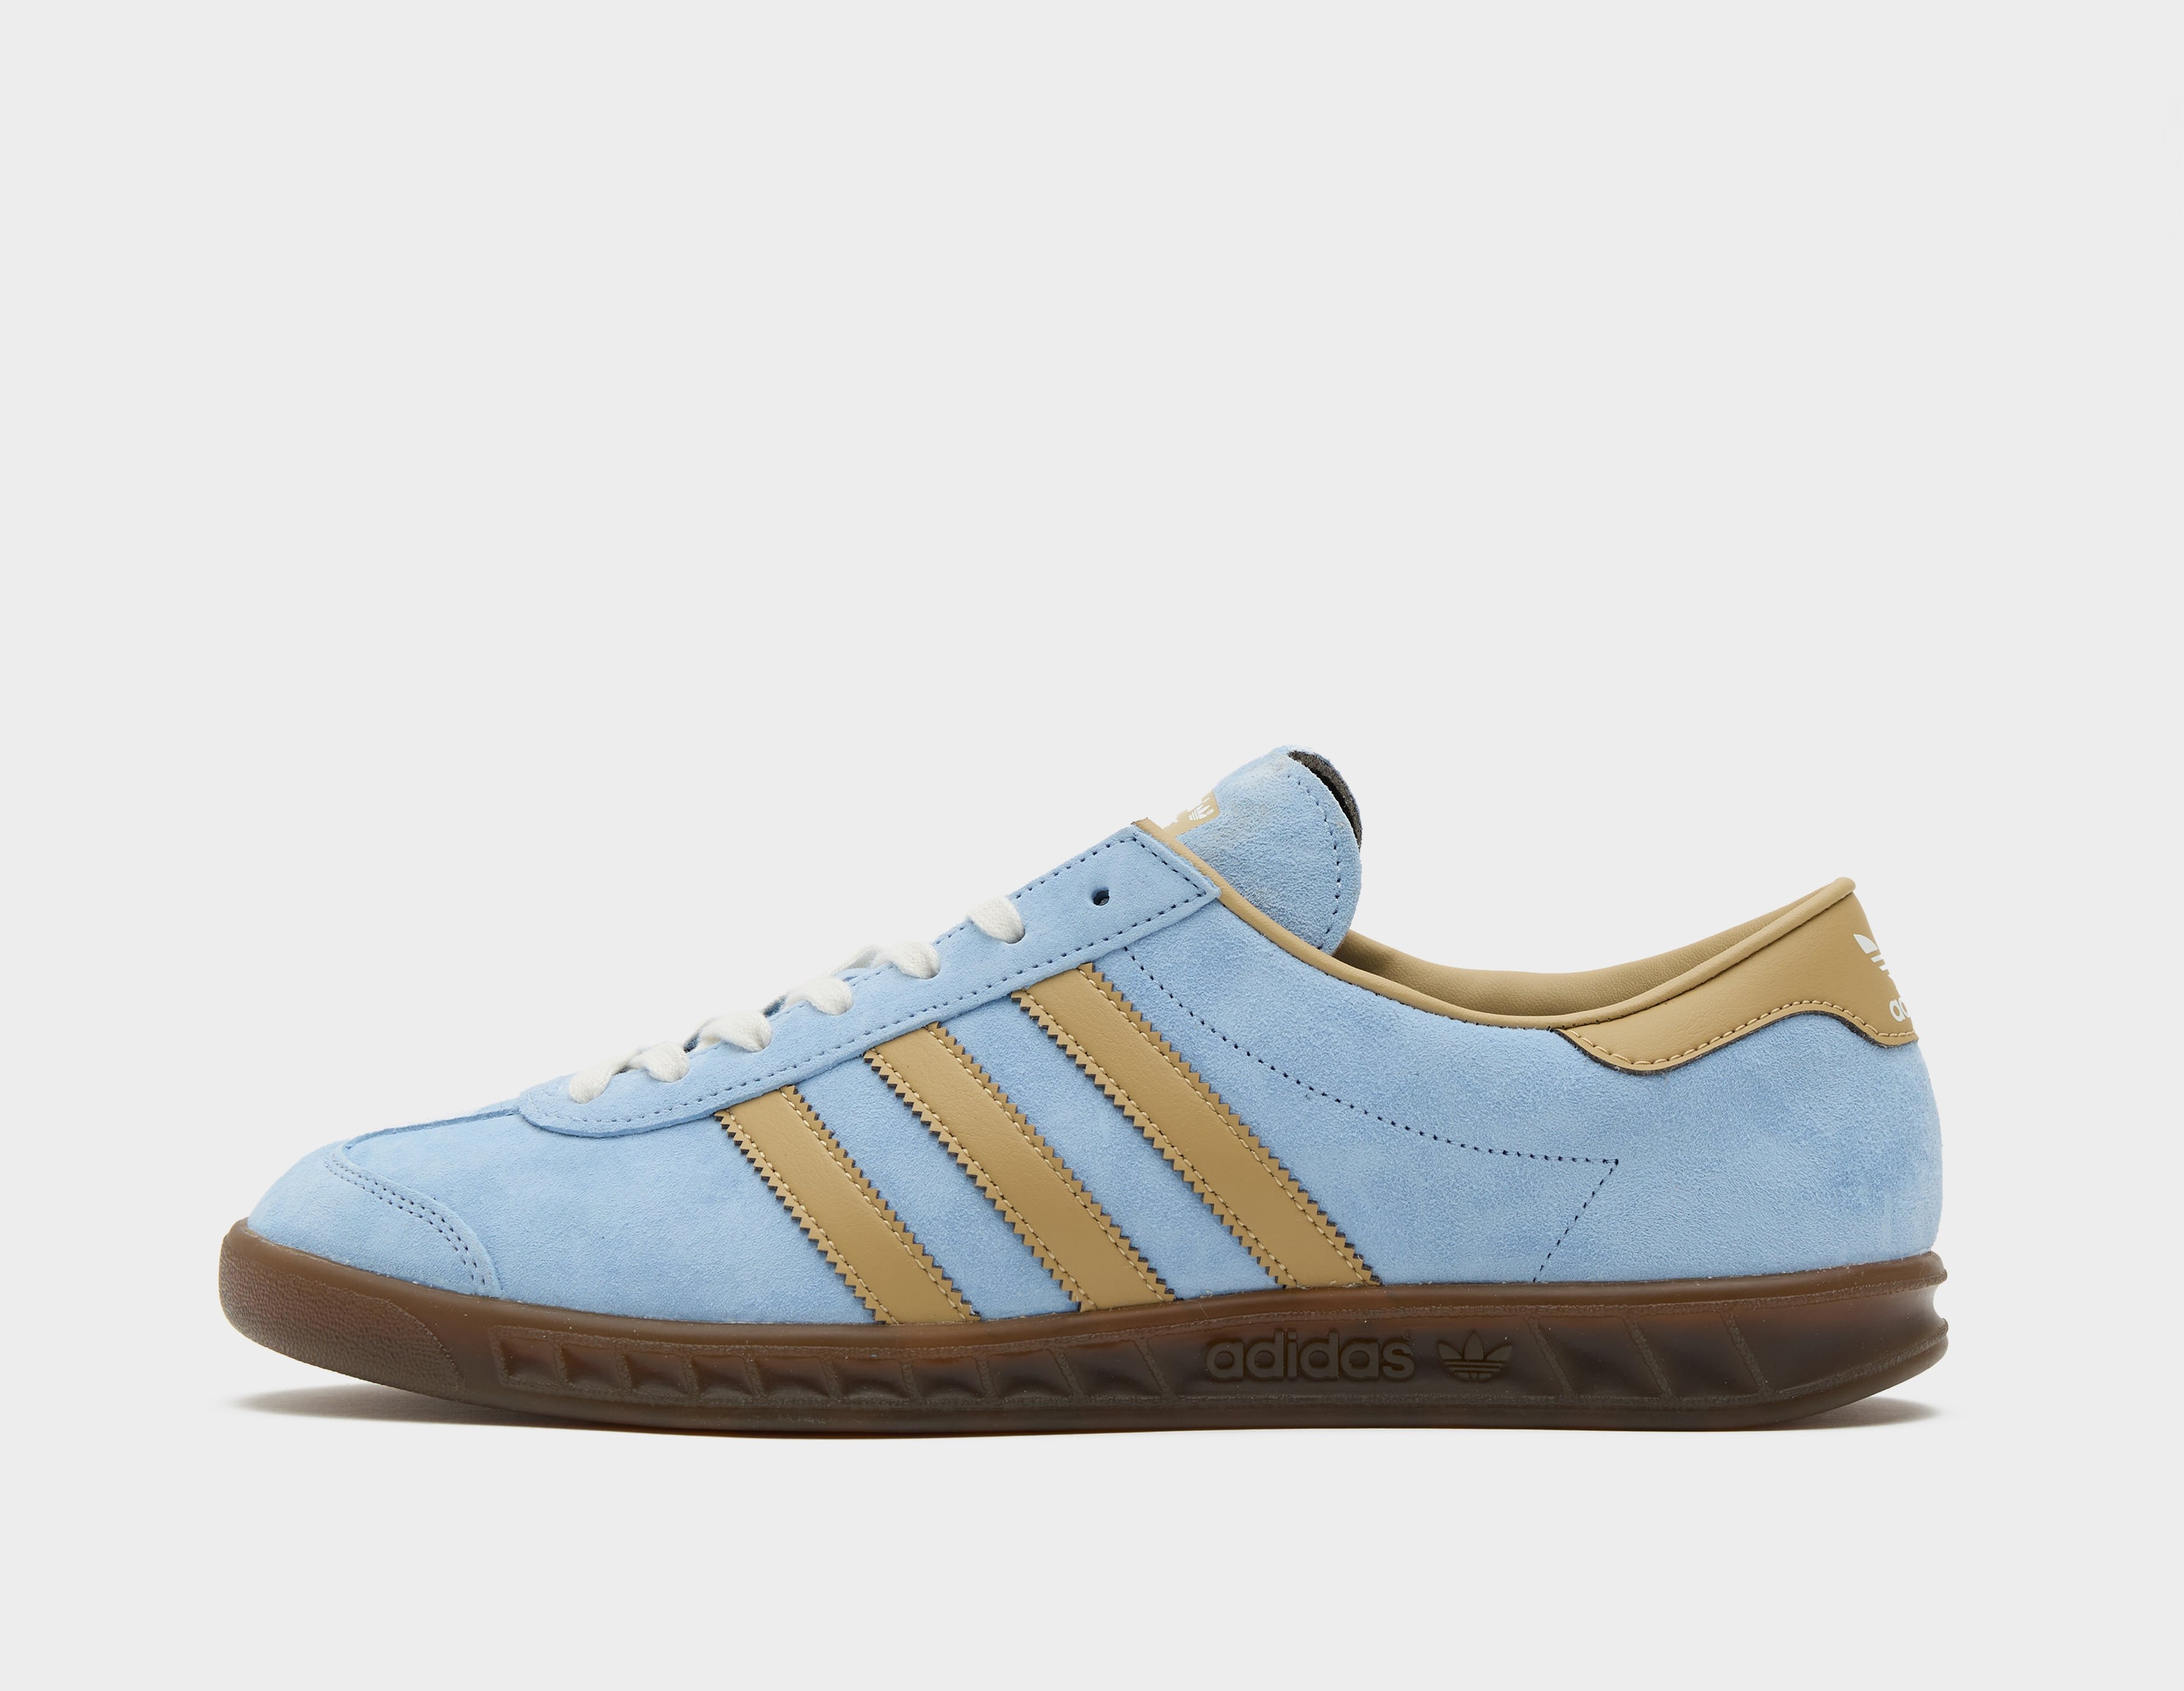 adidas Originals State Series IL, Blue | The Hoxton Trend